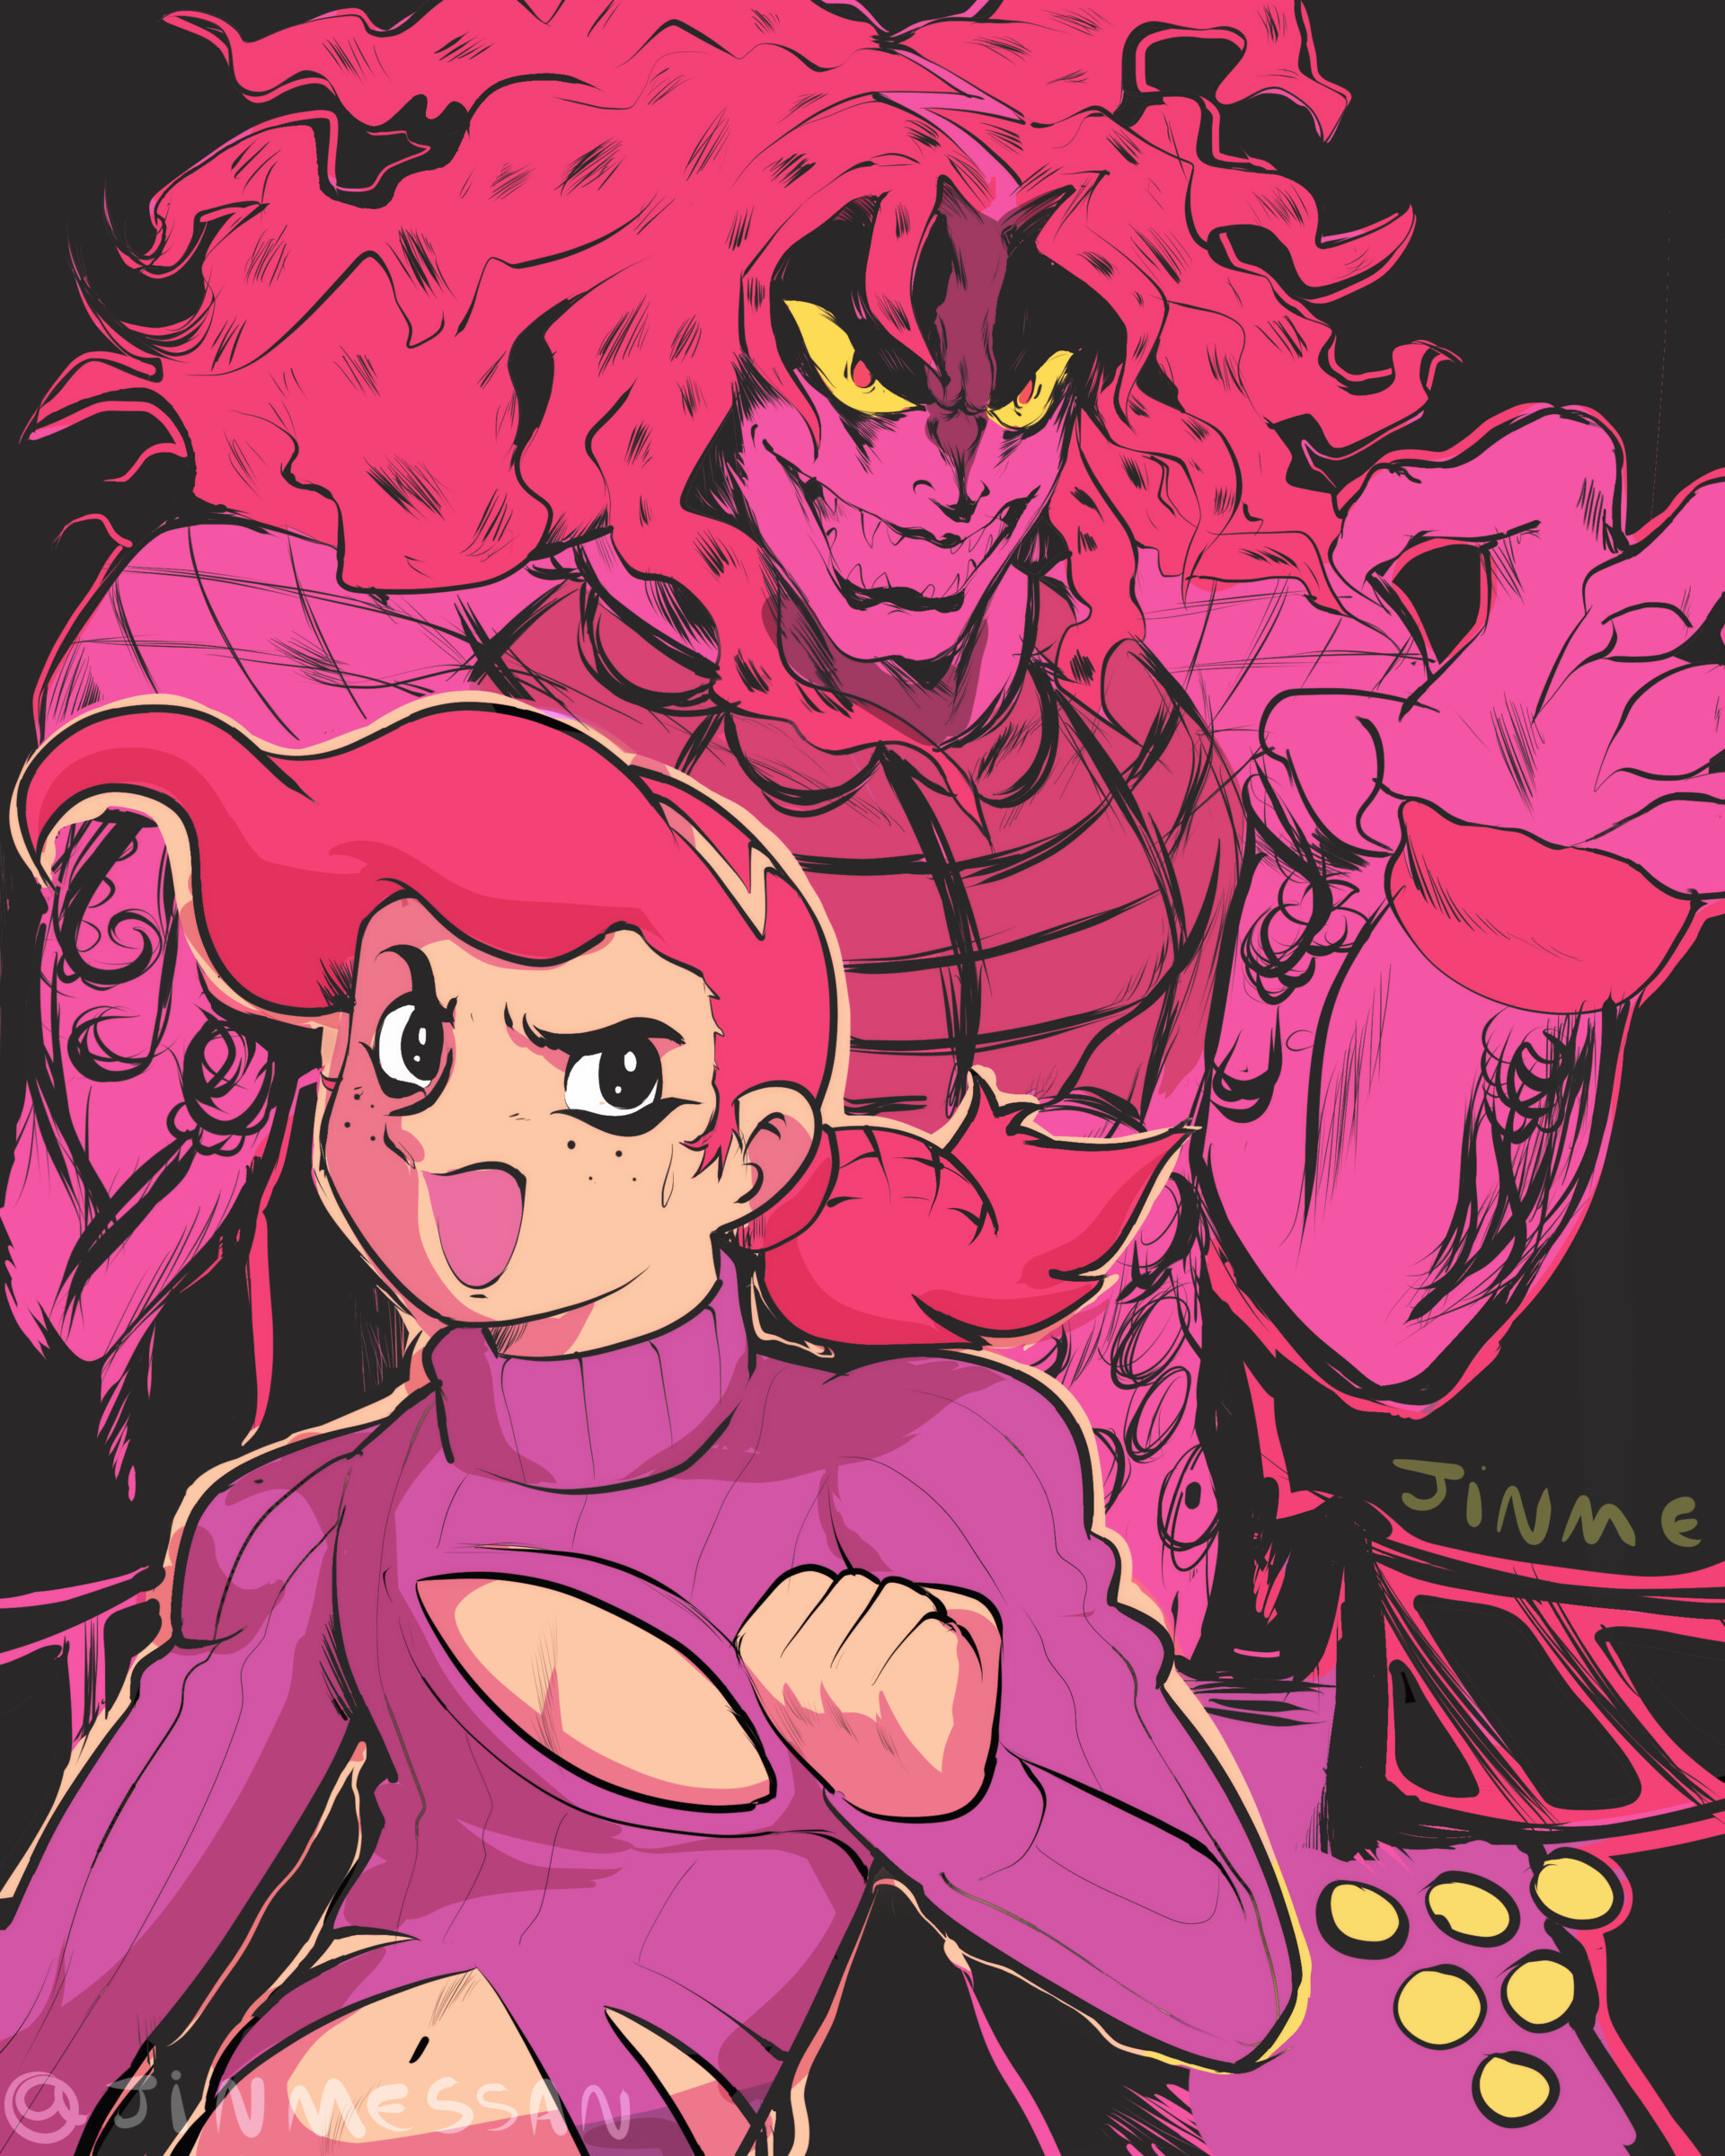 A new saiman x jojo fanart, the previous one didn't have a stand